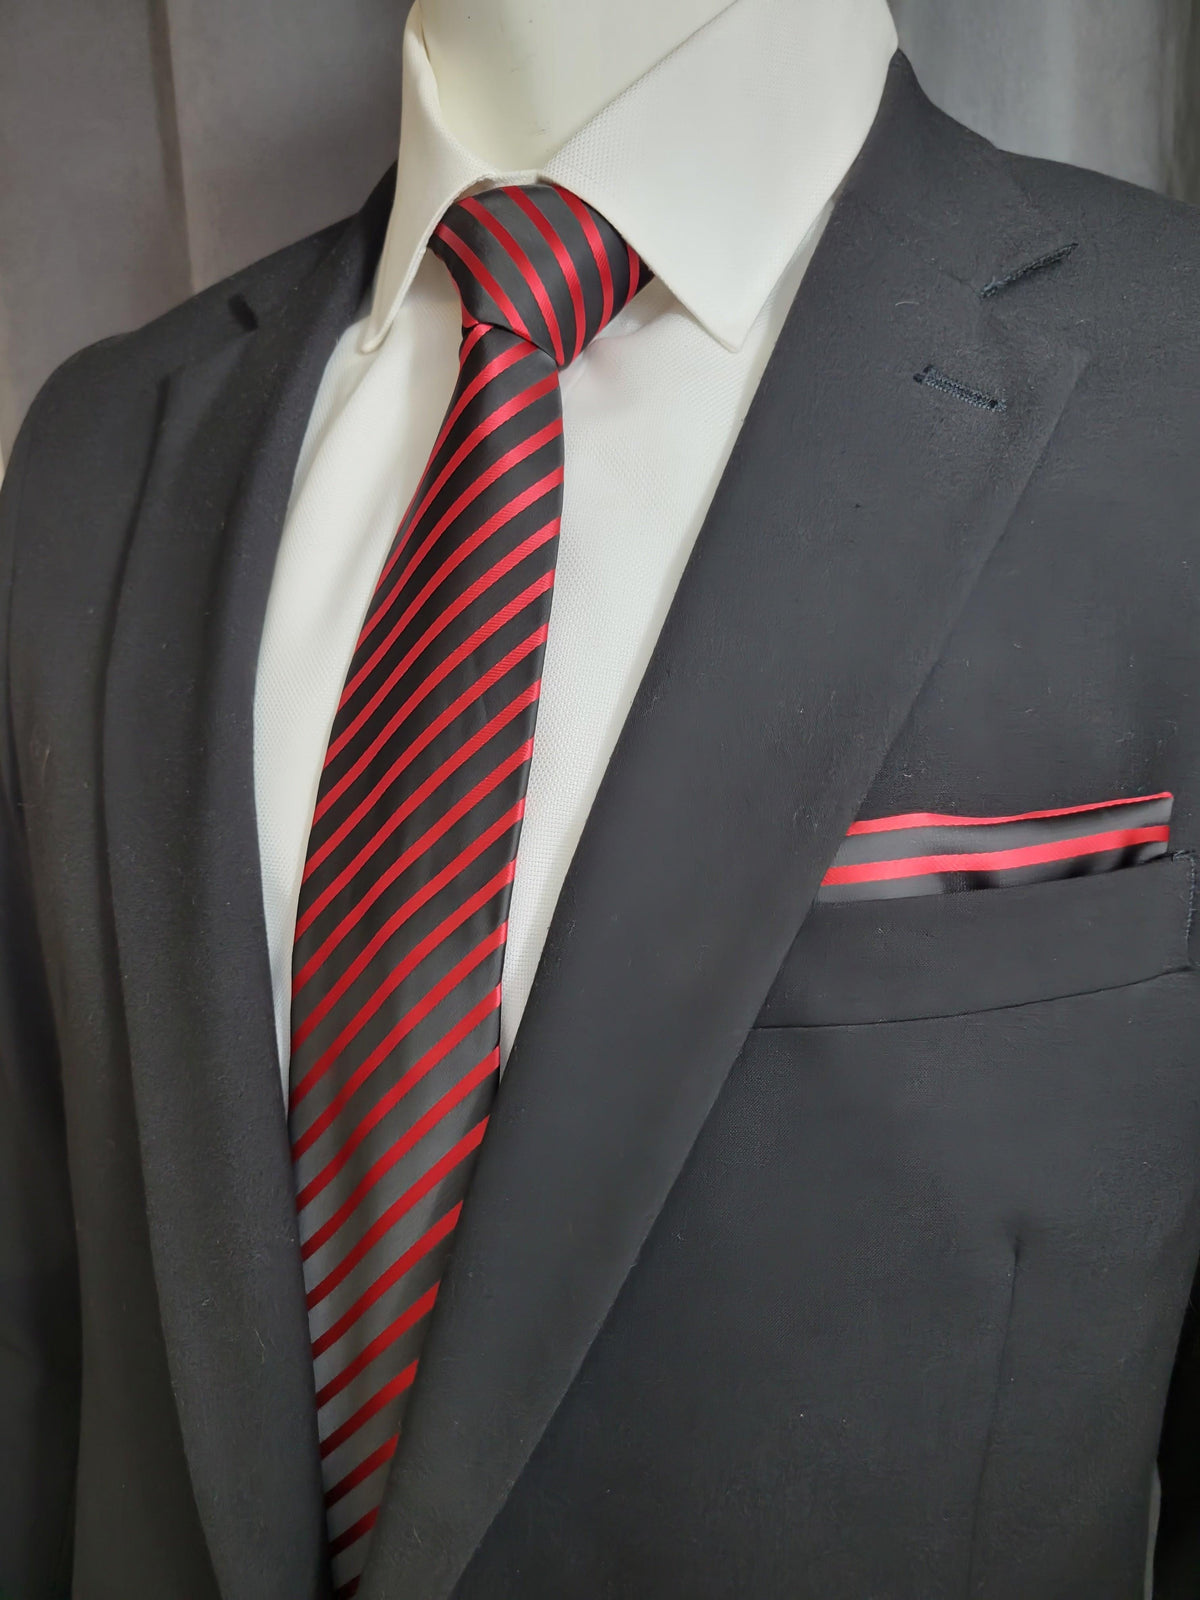 Black and Red Diagonal Necktie and Pocket Square - The Upscale Banker